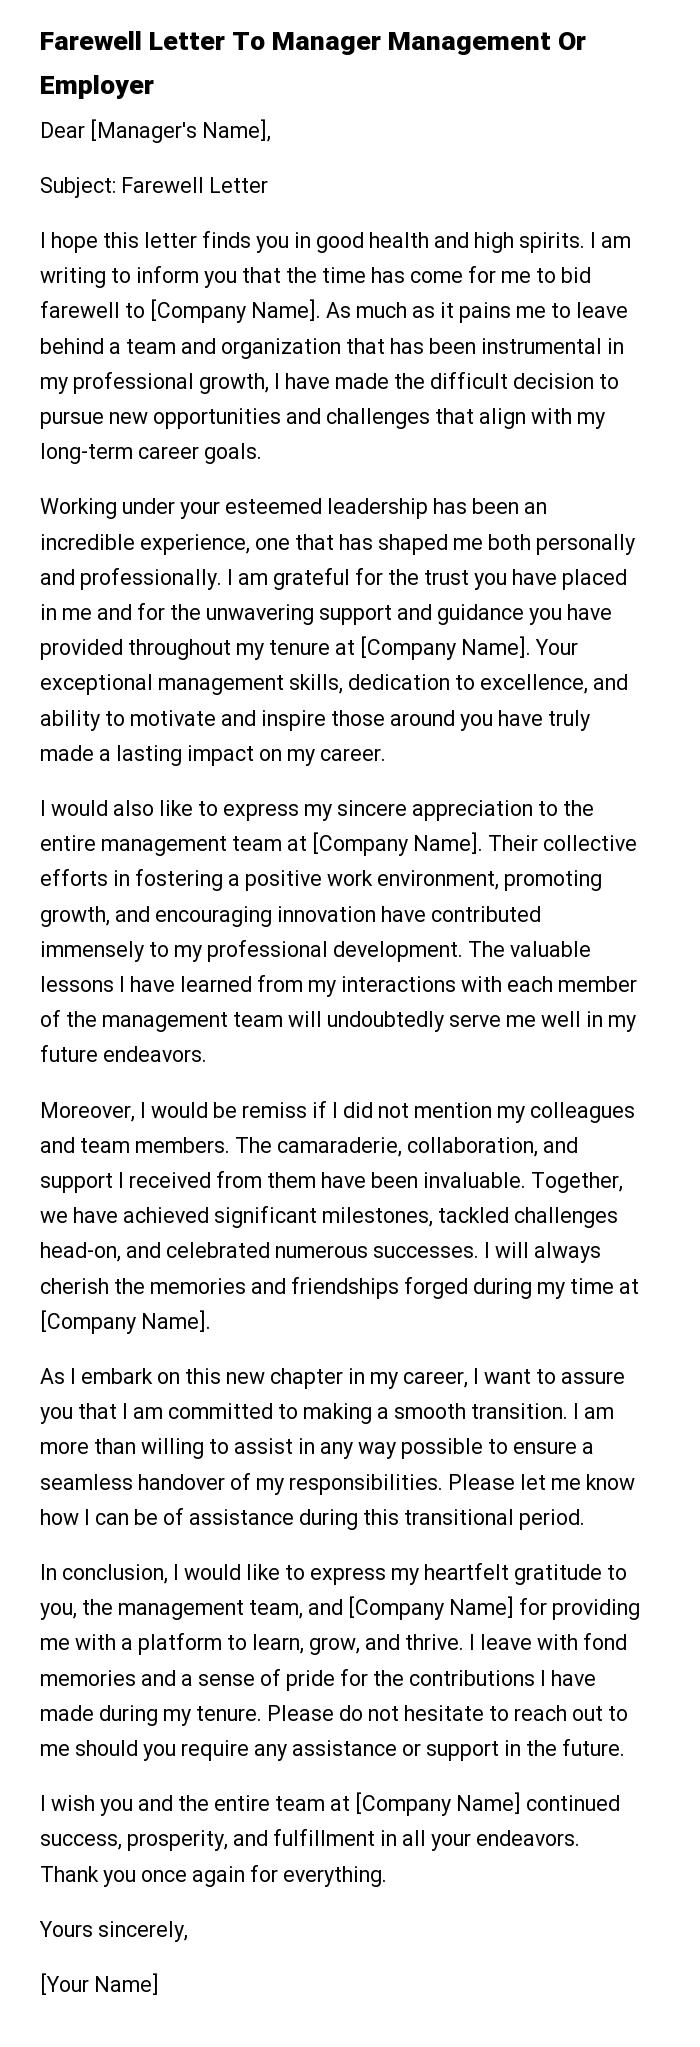 Farewell Letter To Manager Management Or Employer